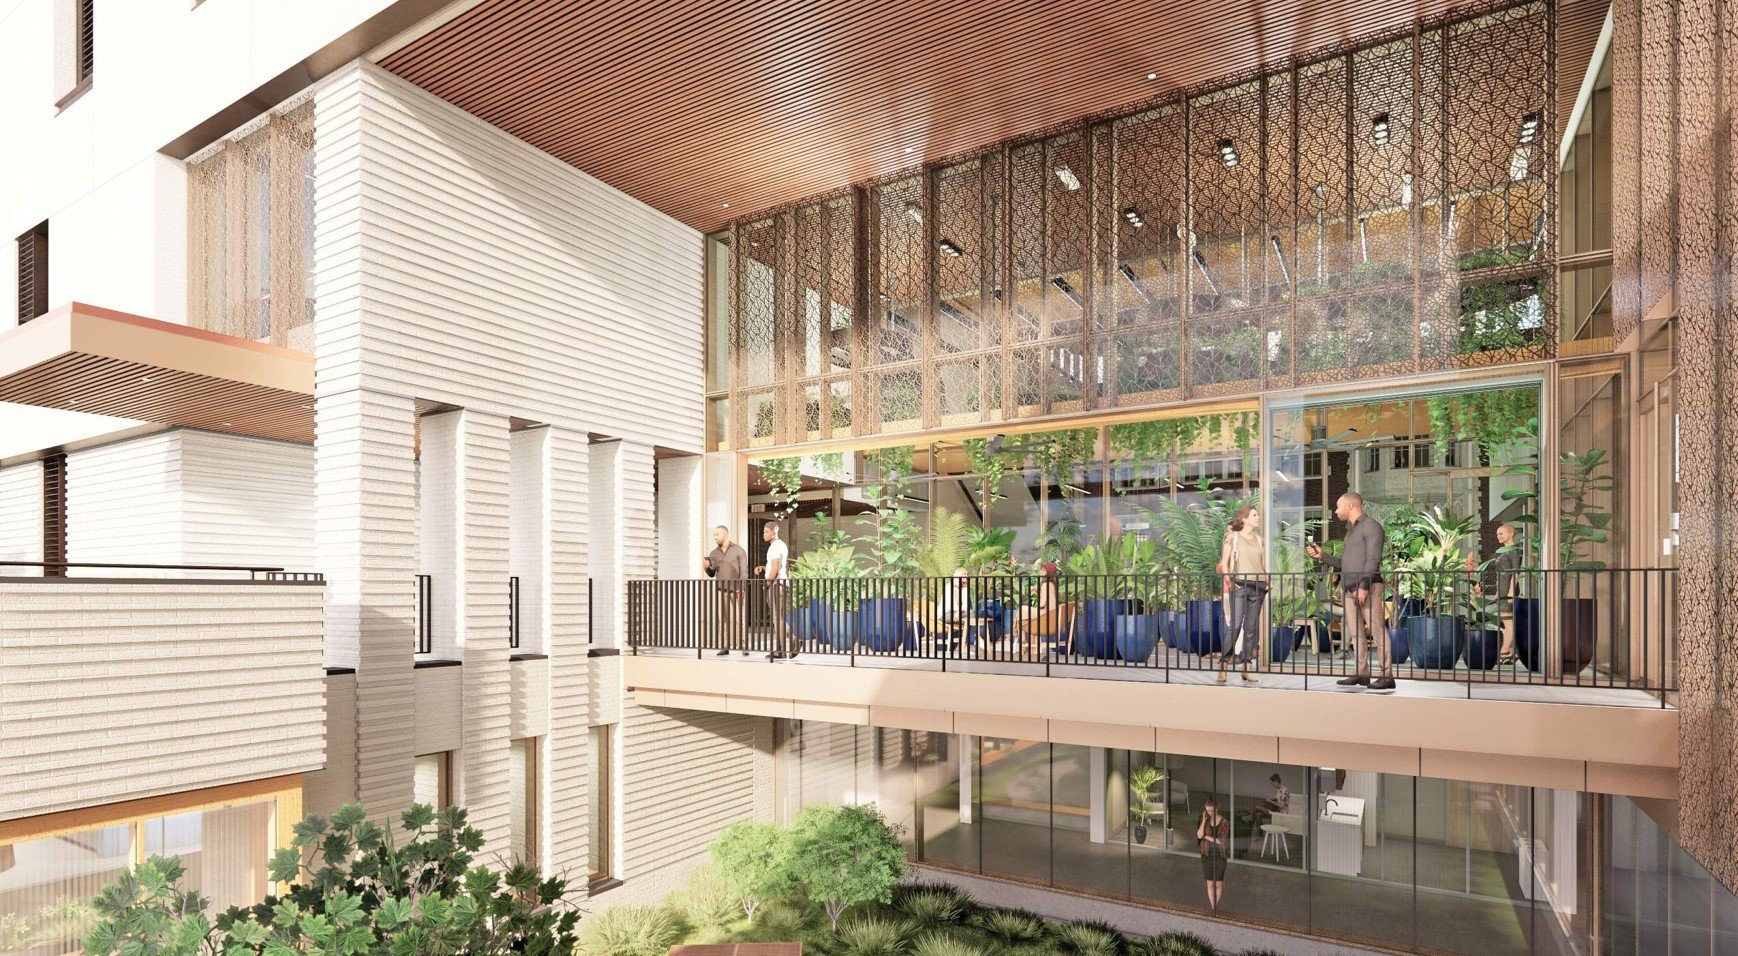 An artist rendering shows the proposed winter garden set in the Frist Health Center at Princeton University